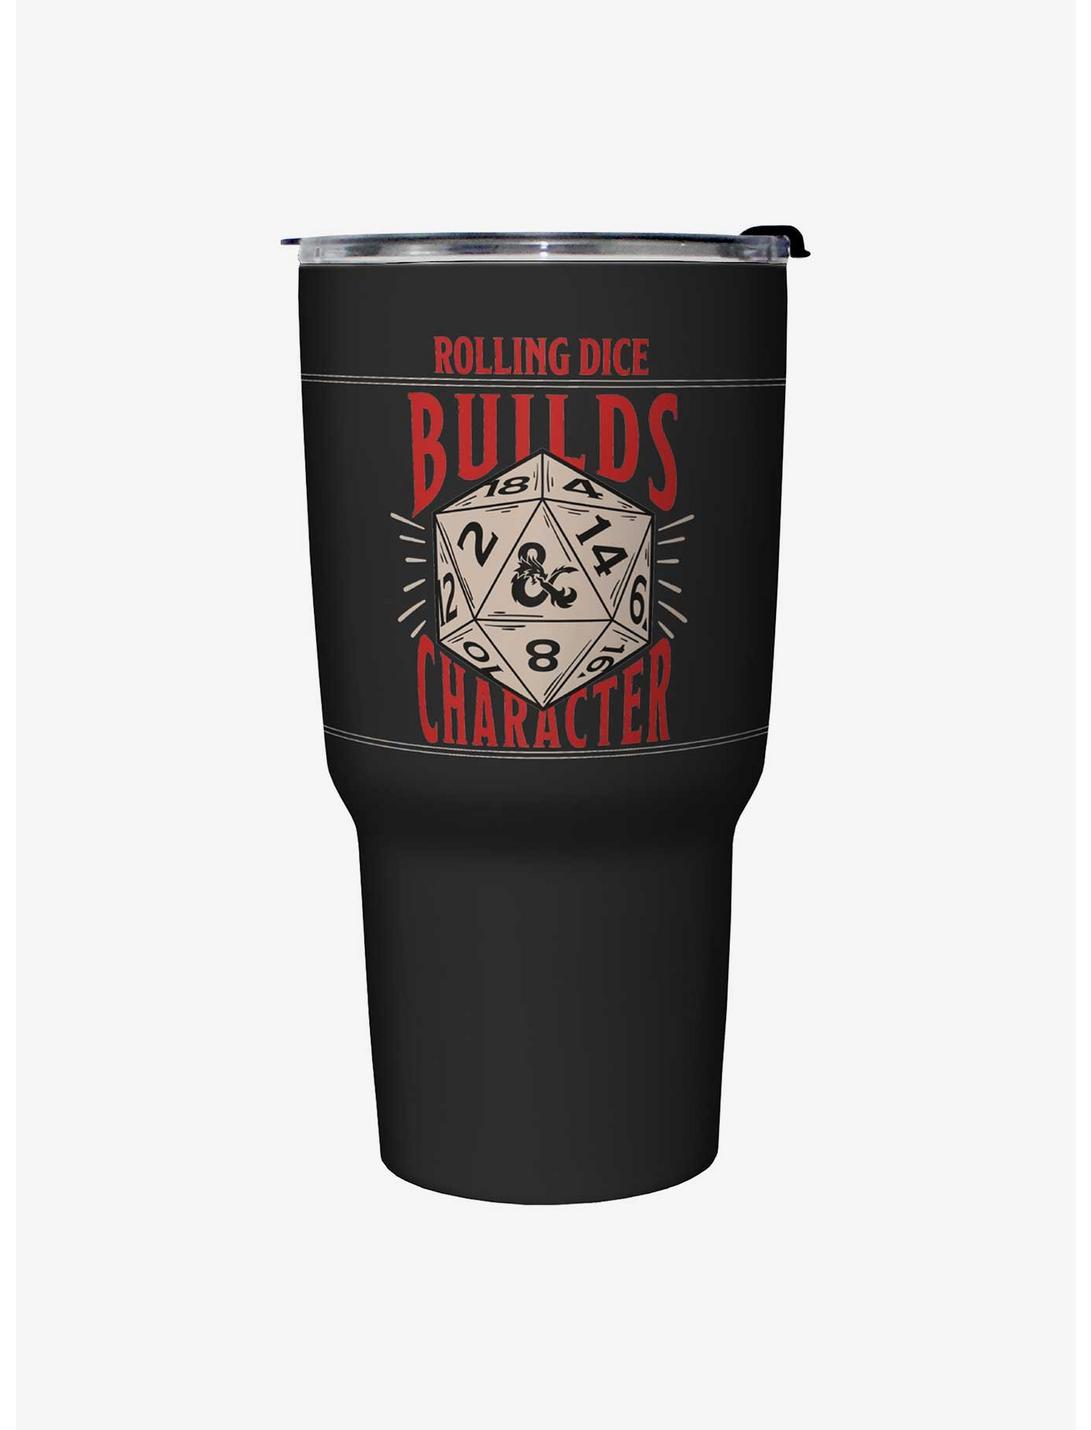 Dungeons & Dragons Rolling Dice Builds Character Travel Mug, , hi-res